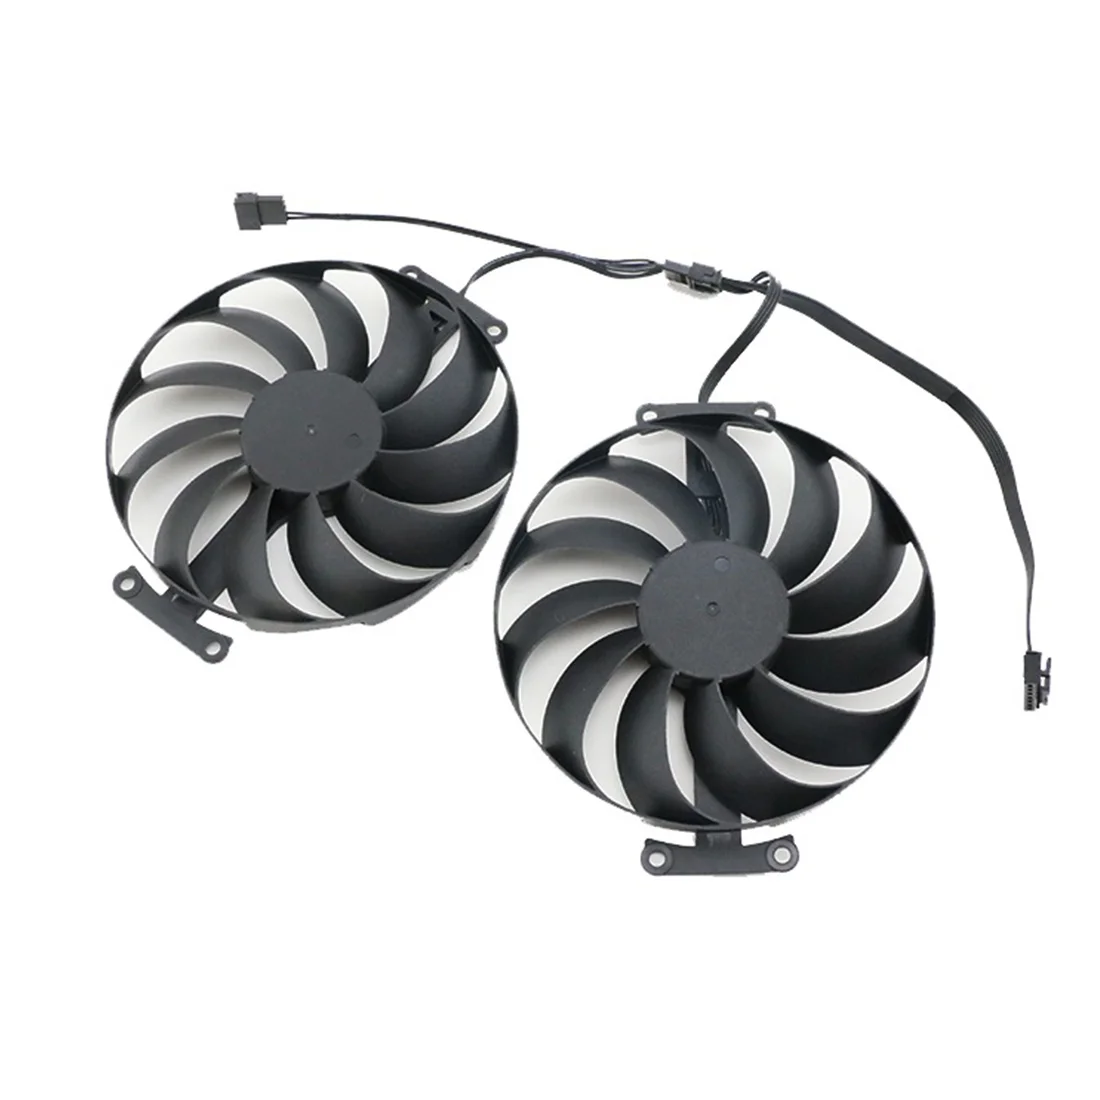 

1Pair 95mm T129215SU 12V 0.5A 6Pin RTX3070 3060Ti Graphic Card Cooler Fans for ASUS GeForce RTX 3060 Ti 3070 DUAL OC